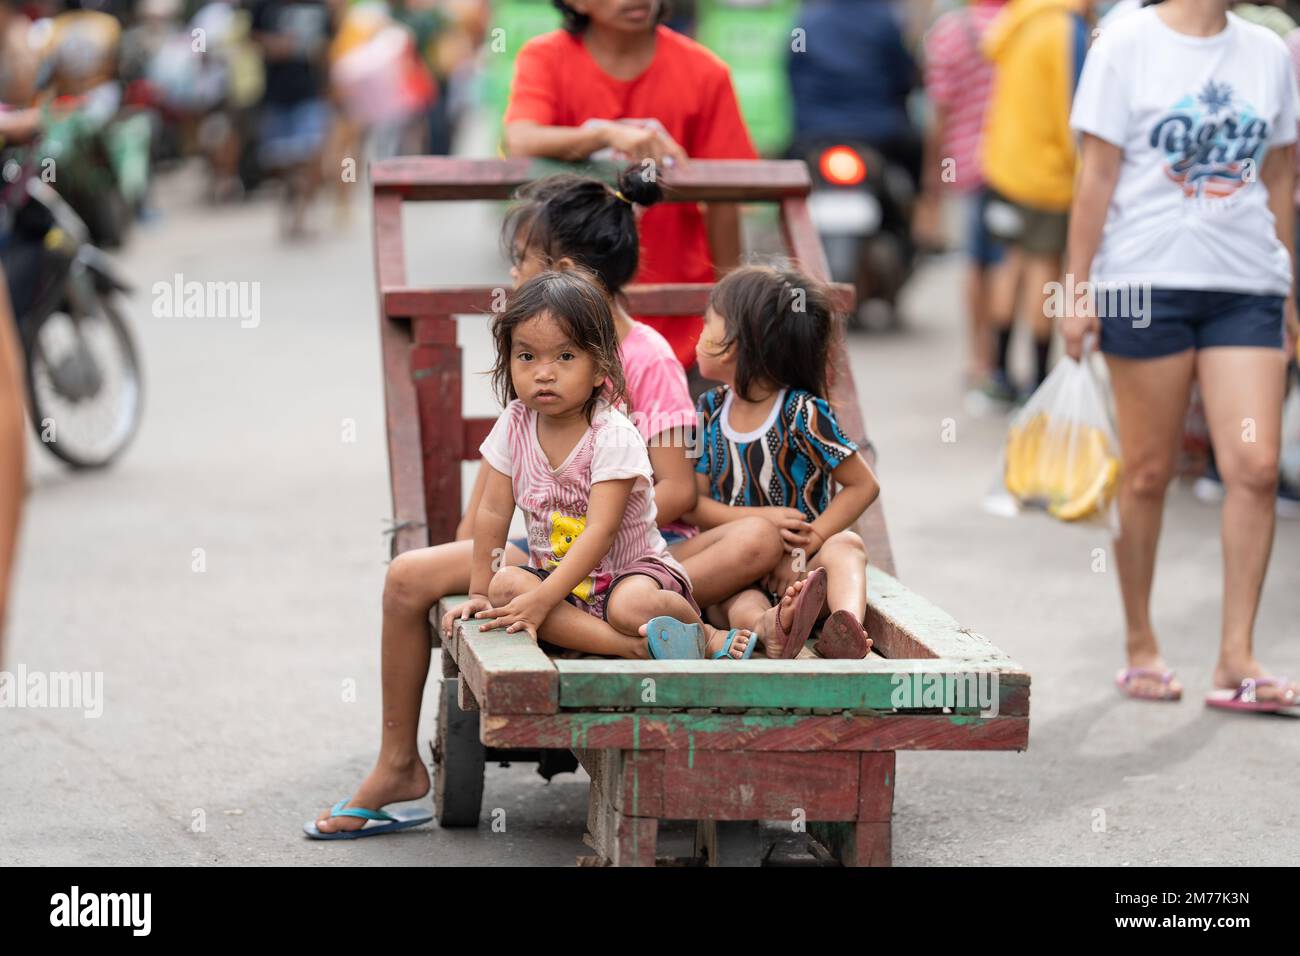 Young children in a poor community ride on a wooden pushcart, Philippines Stock Photo